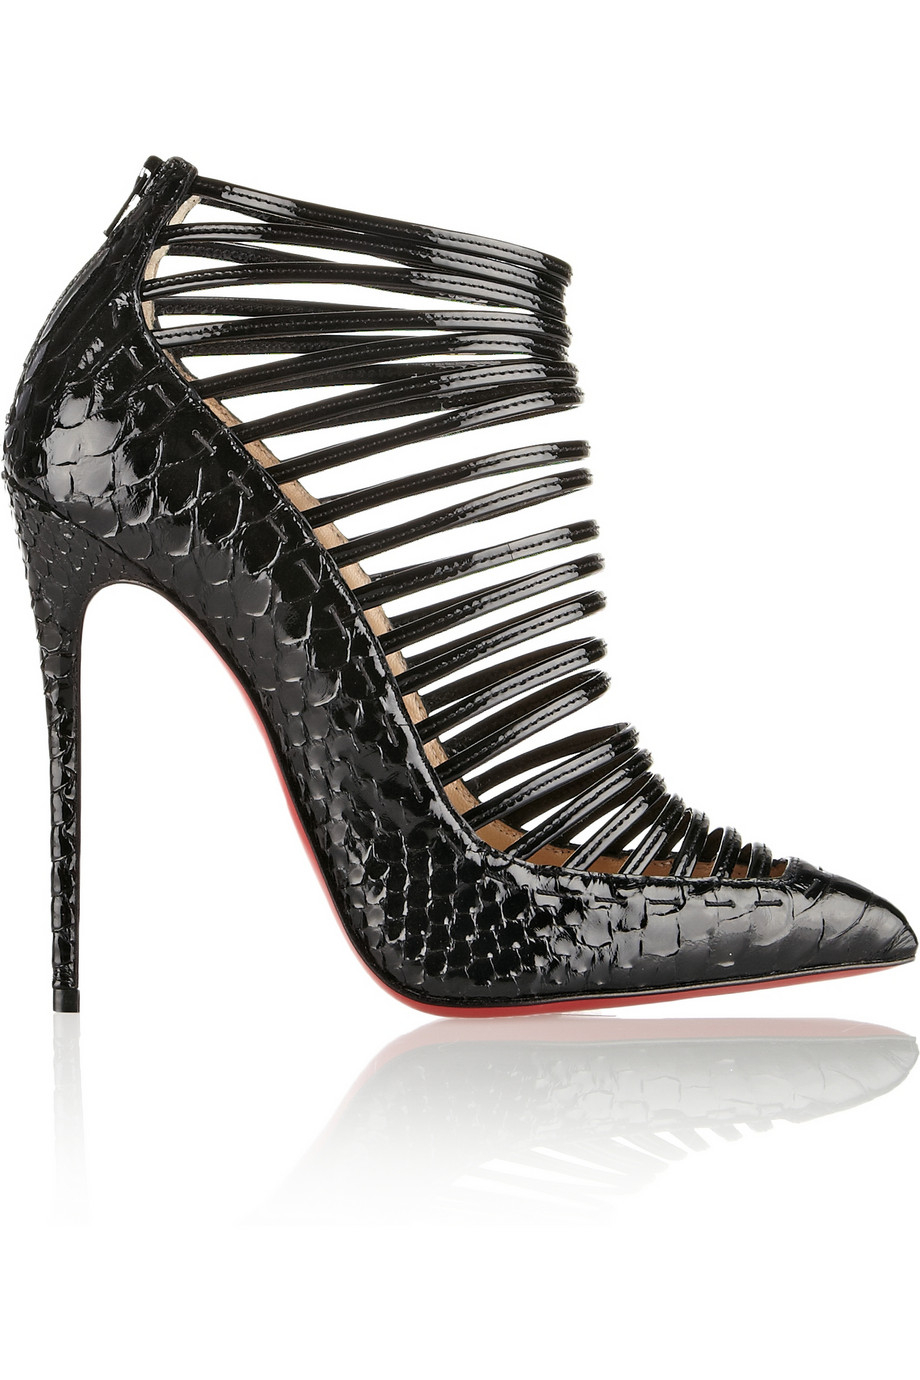 Christian Louboutin Gortik 120 Python And Patent-Leather Ankle Boots in Black - Lyst